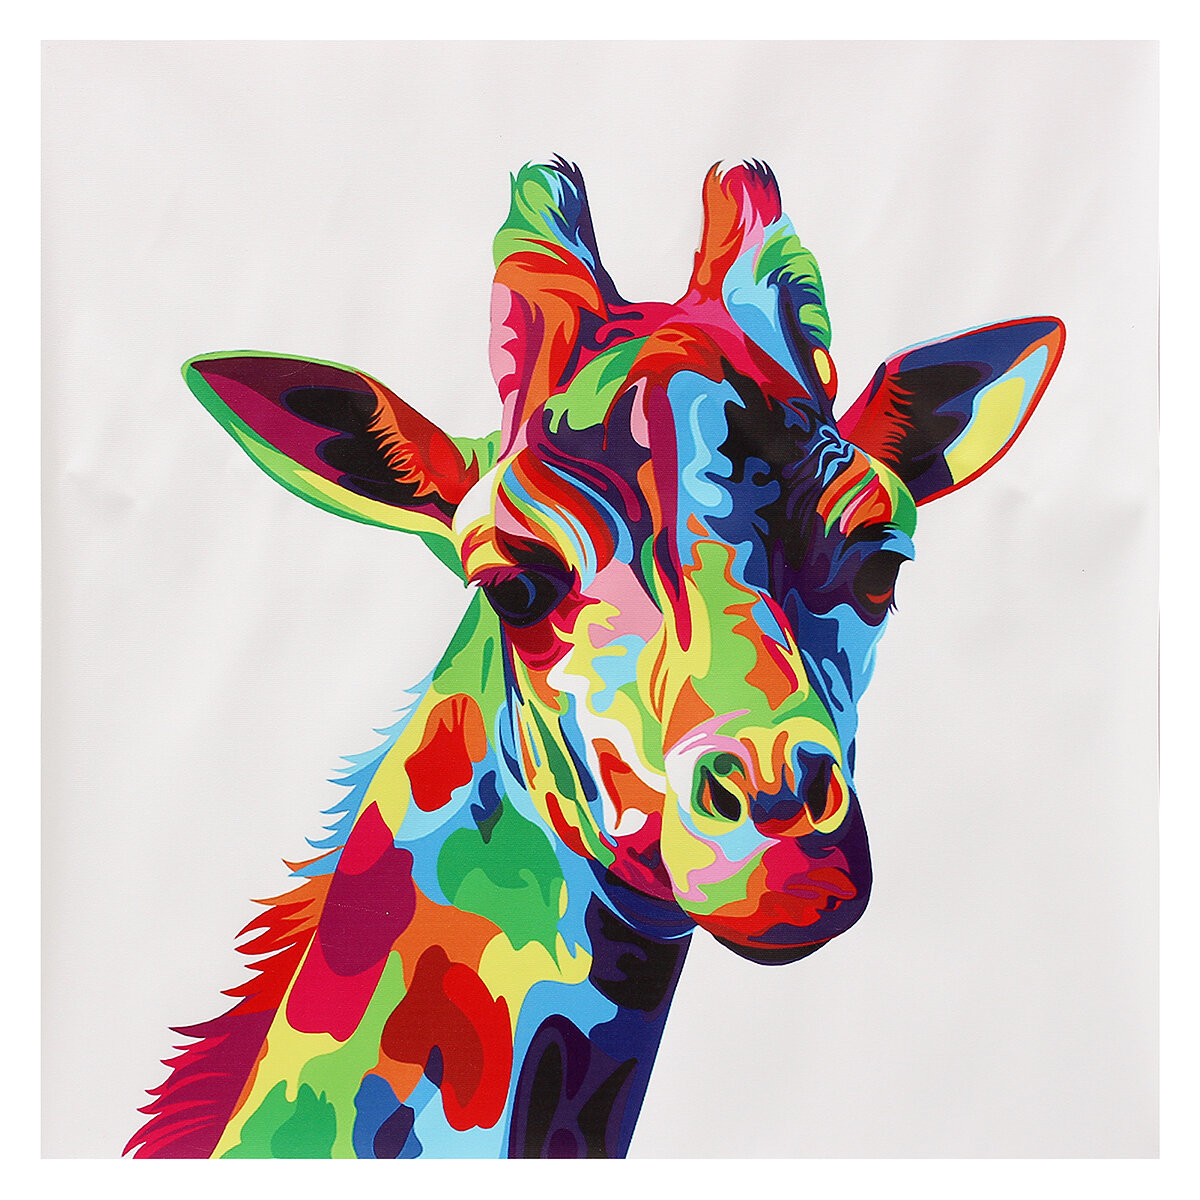 

Frameless Wall Decorative Paintings Color Giraffe Canvas Print Art Pictures Wall Hanging Decor for Home Office